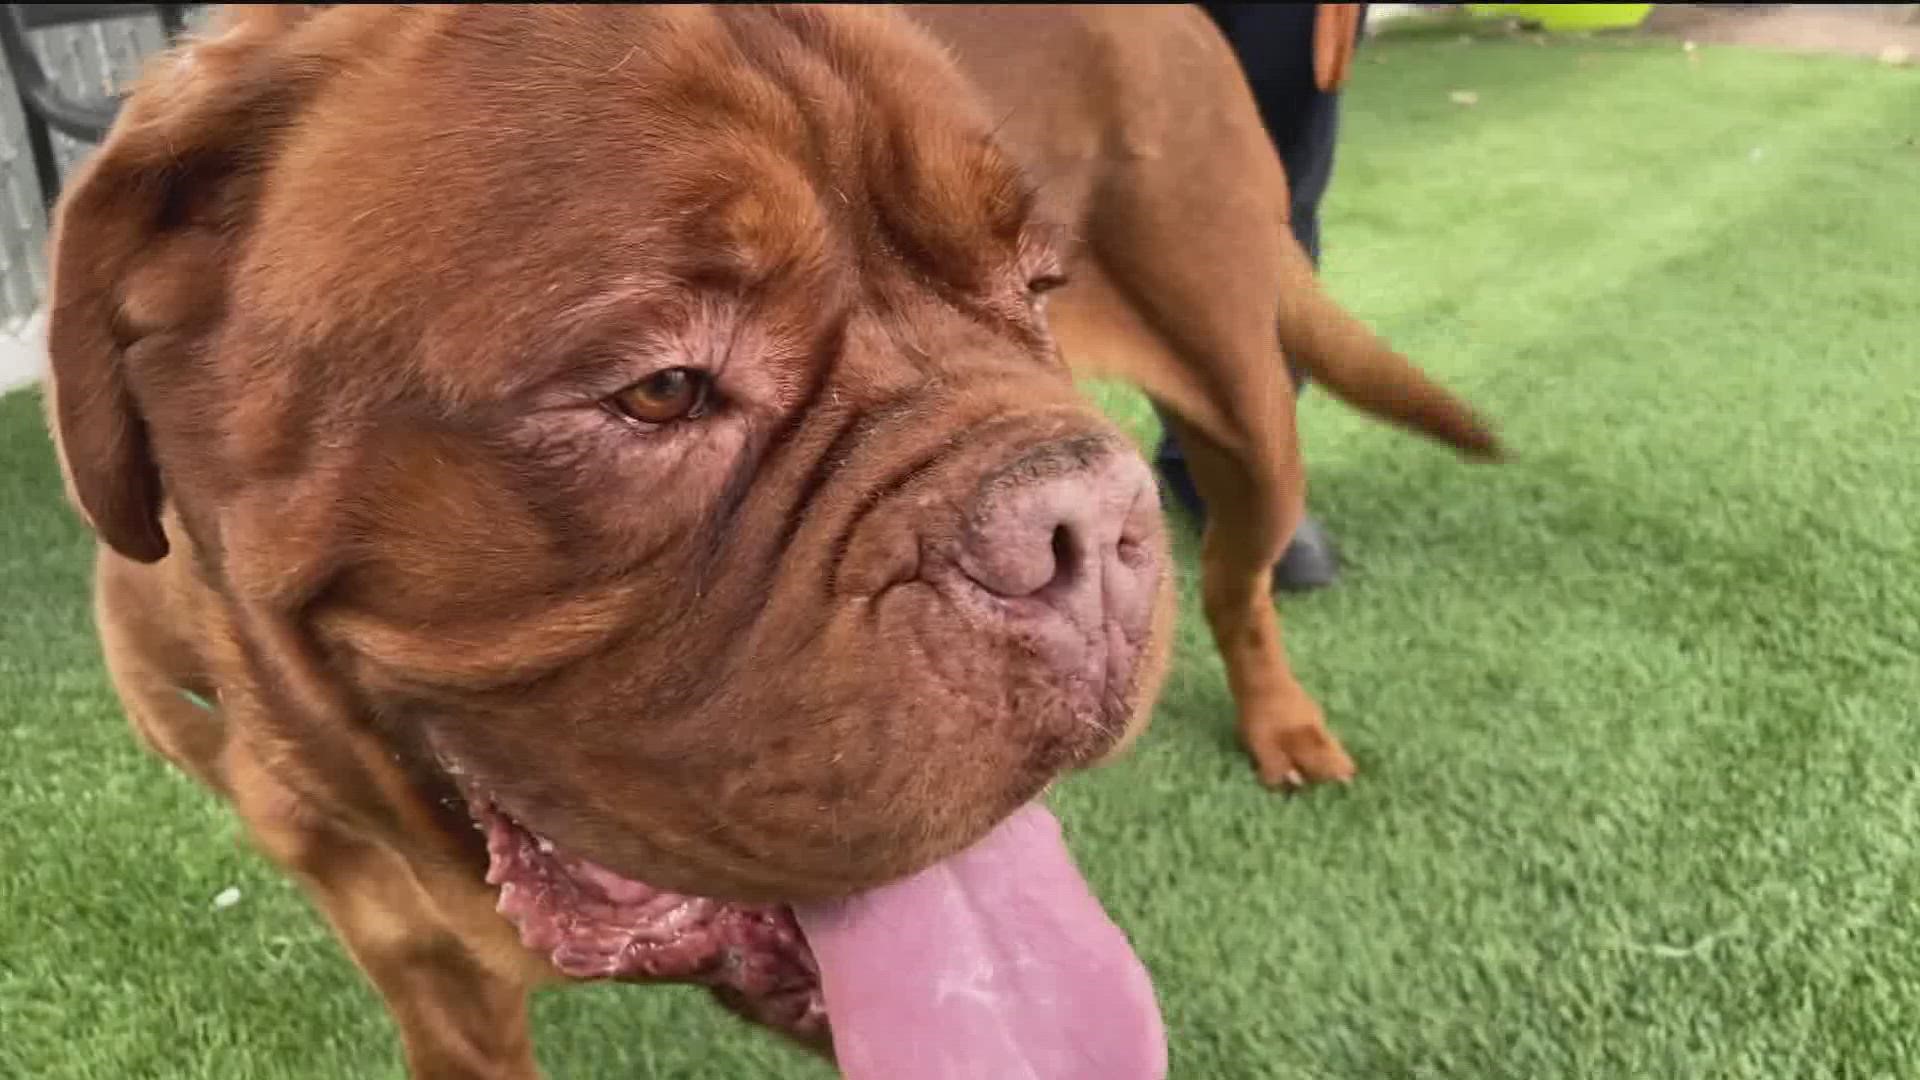 Back in July, a 4-year-old Dogue De Bordeuax was on the brink of death but is now better, according to the San Diego Humane Society.